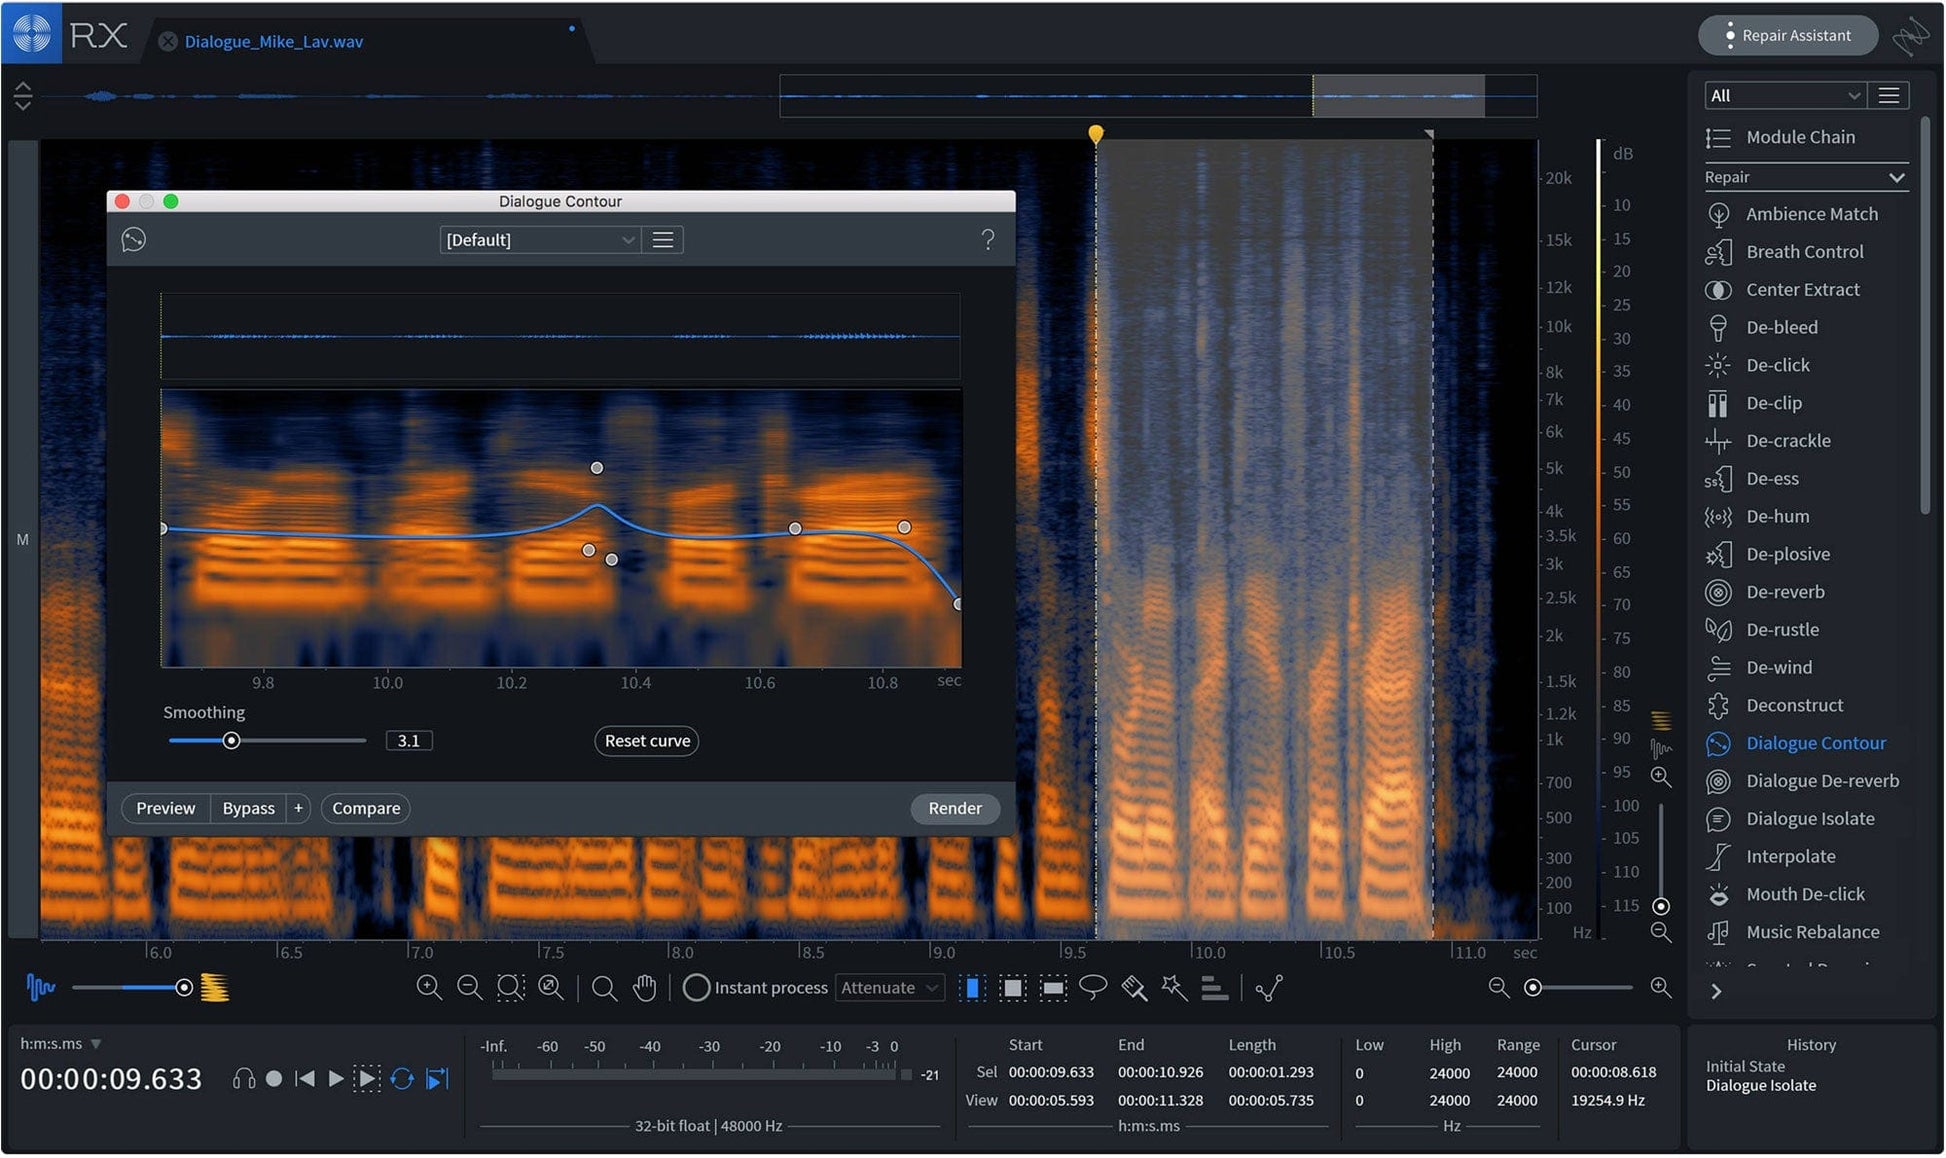 iZotope RX 7 Advanced Professional Complete Audio Repair - PSSL ProSound and Stage Lighting